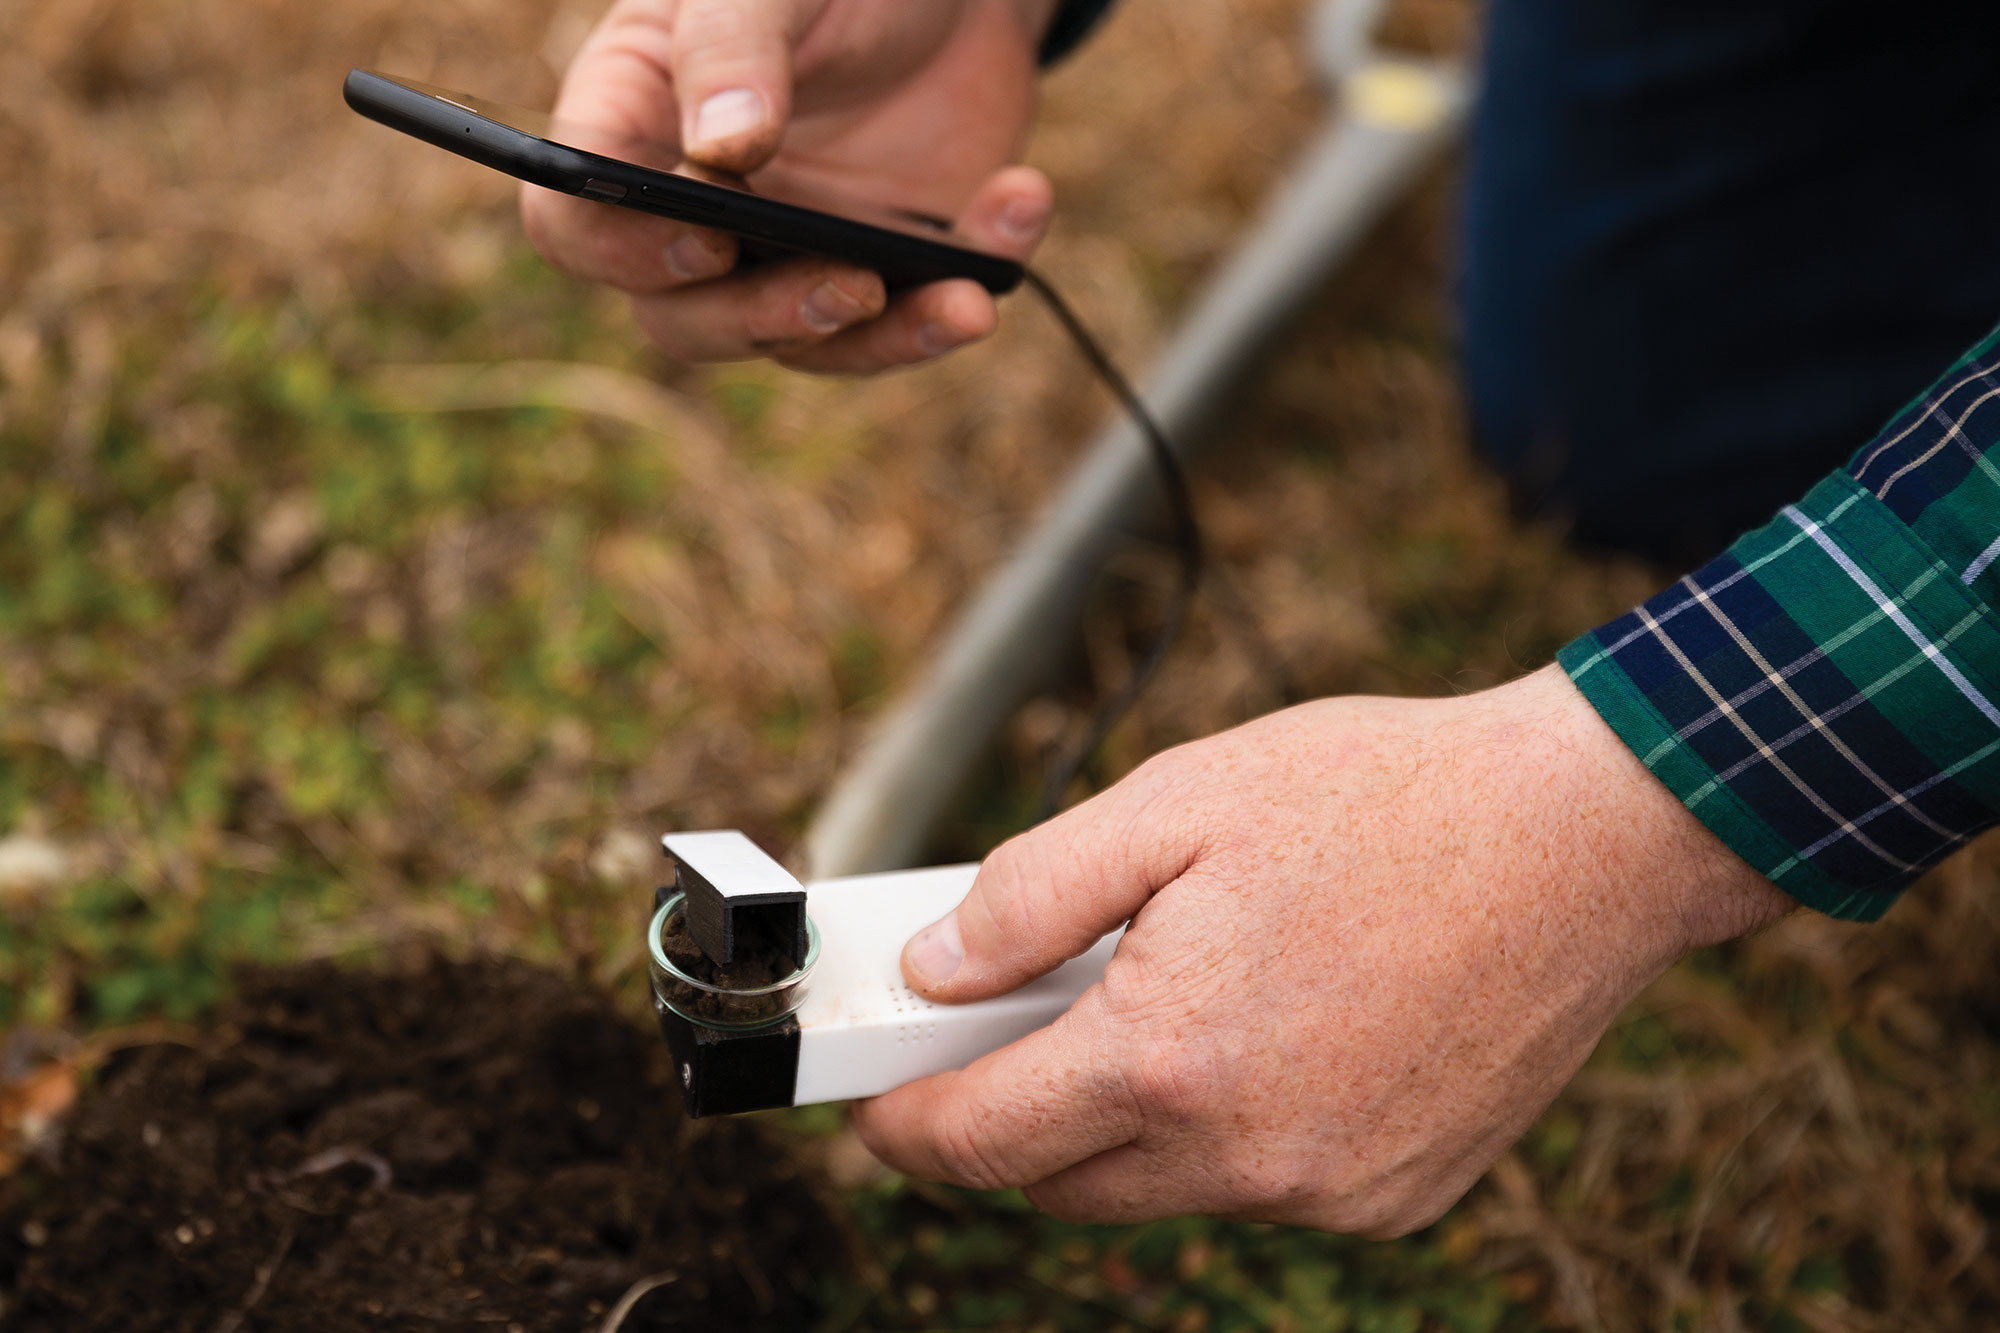 Noble Research Institute and collaborators test technologies that could be used by farmers and ranchers to measure soil organic carbon in field.